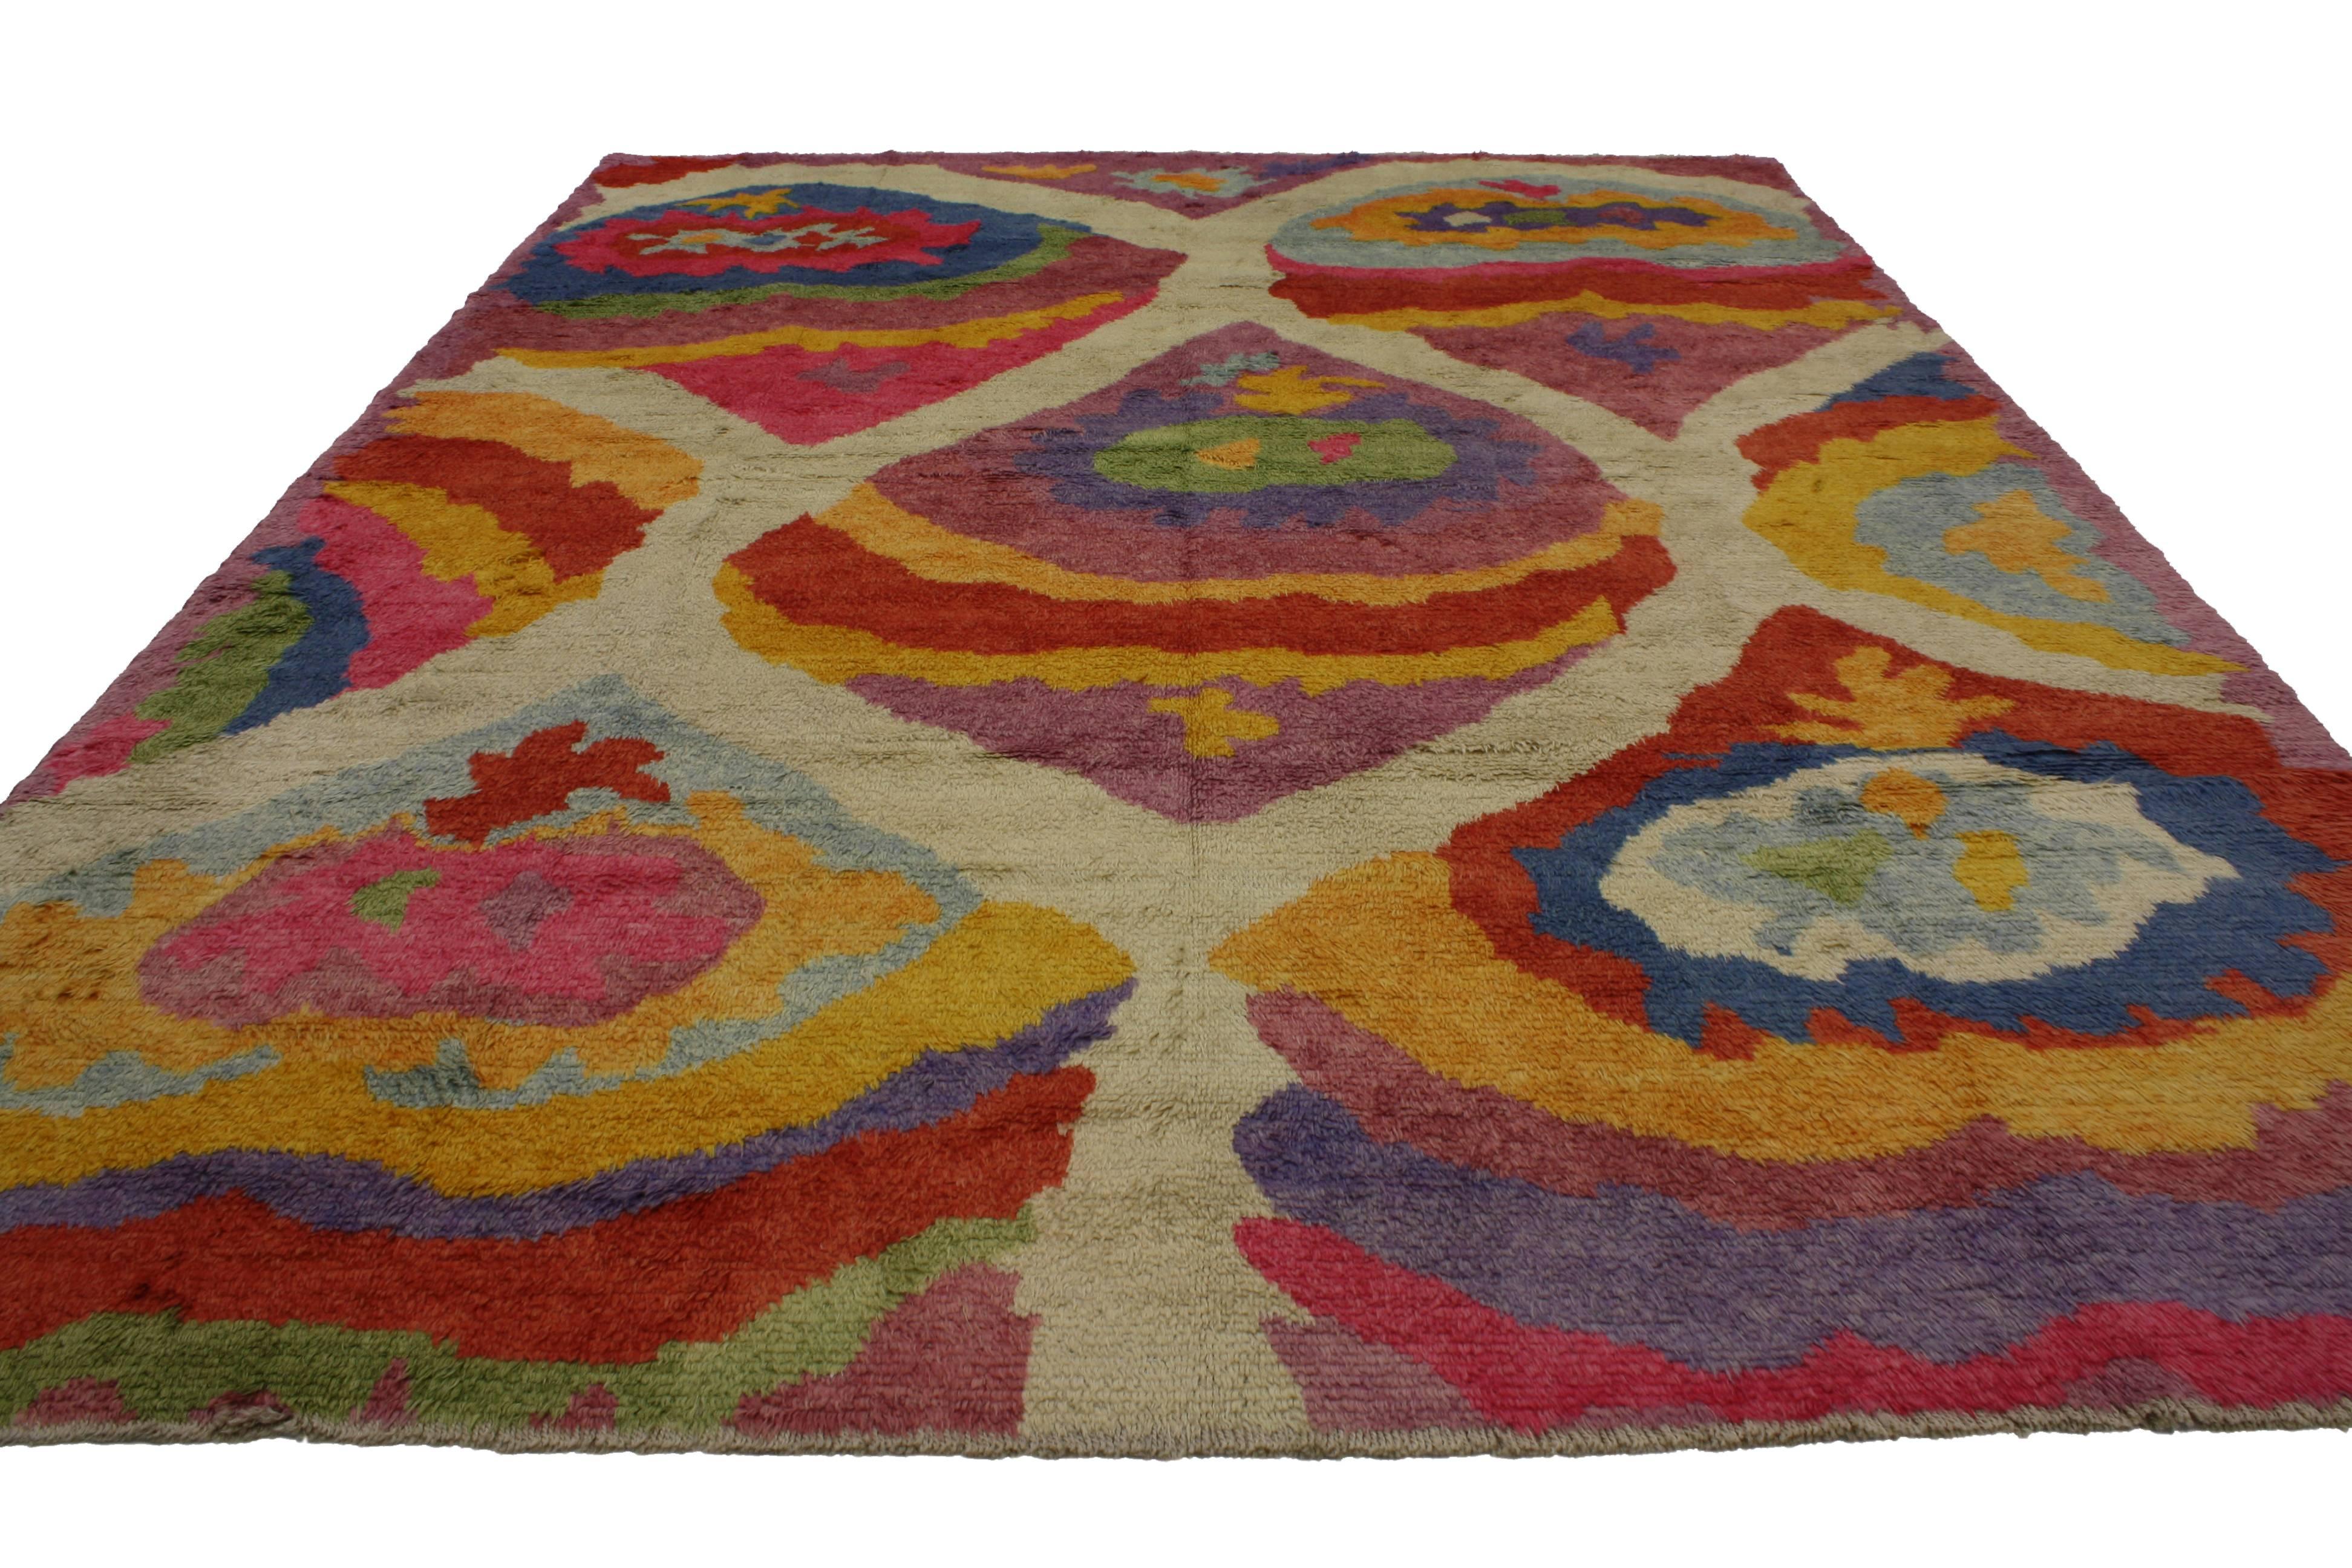 Post-Modern New Colorful Contemporary Tulu Shag Area Rug Inspired by Robert Delaunay